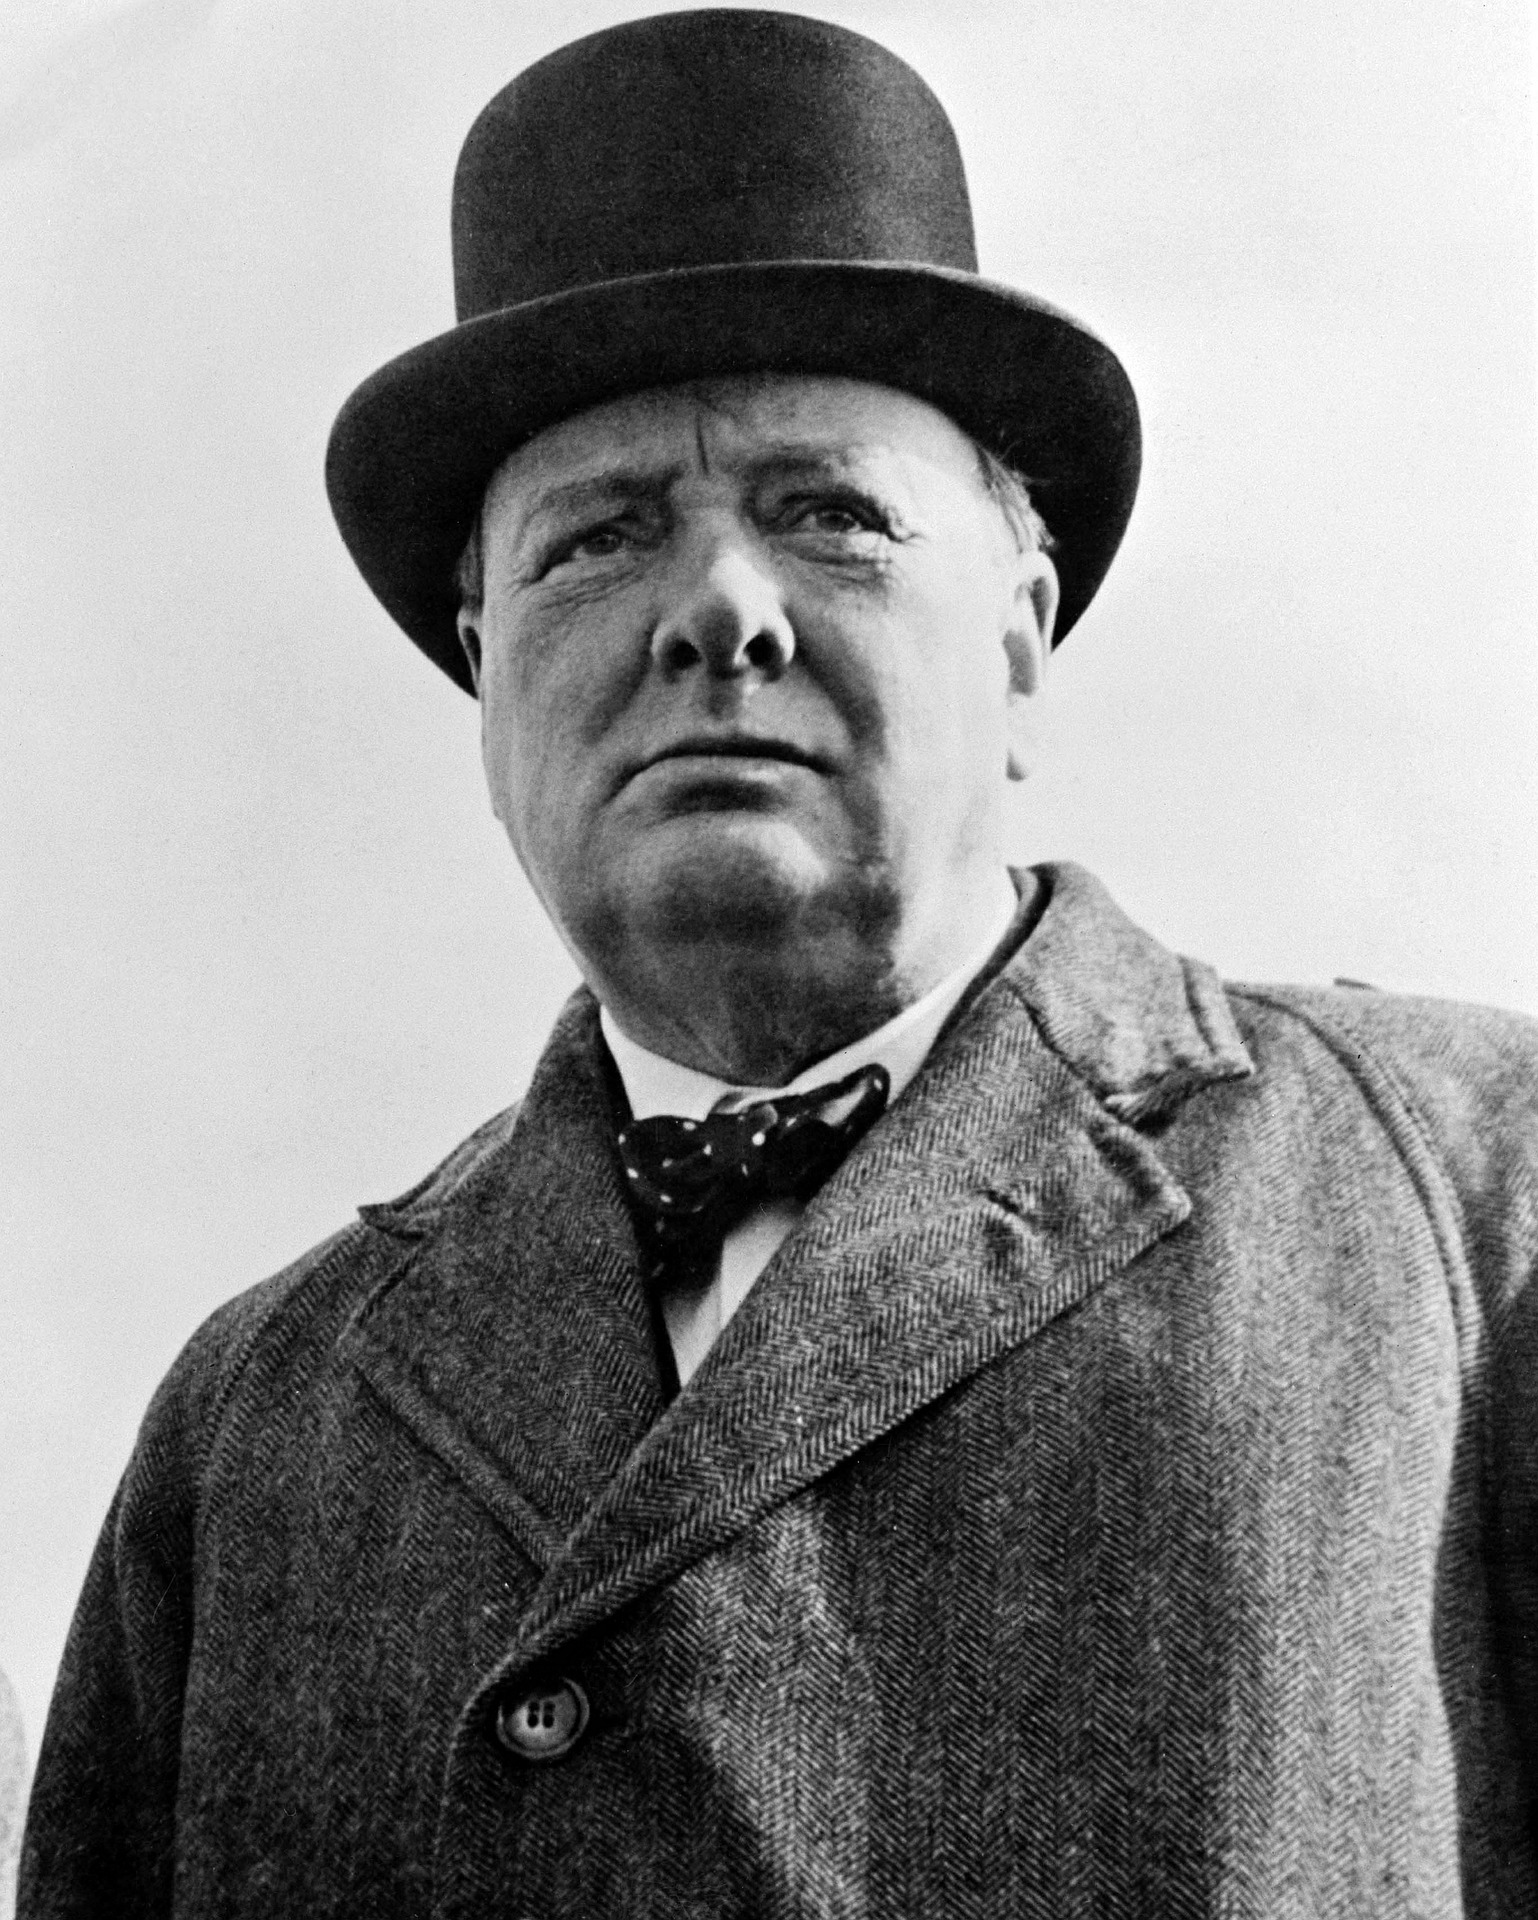 Aliens are probably out there, according to Winston Churchill